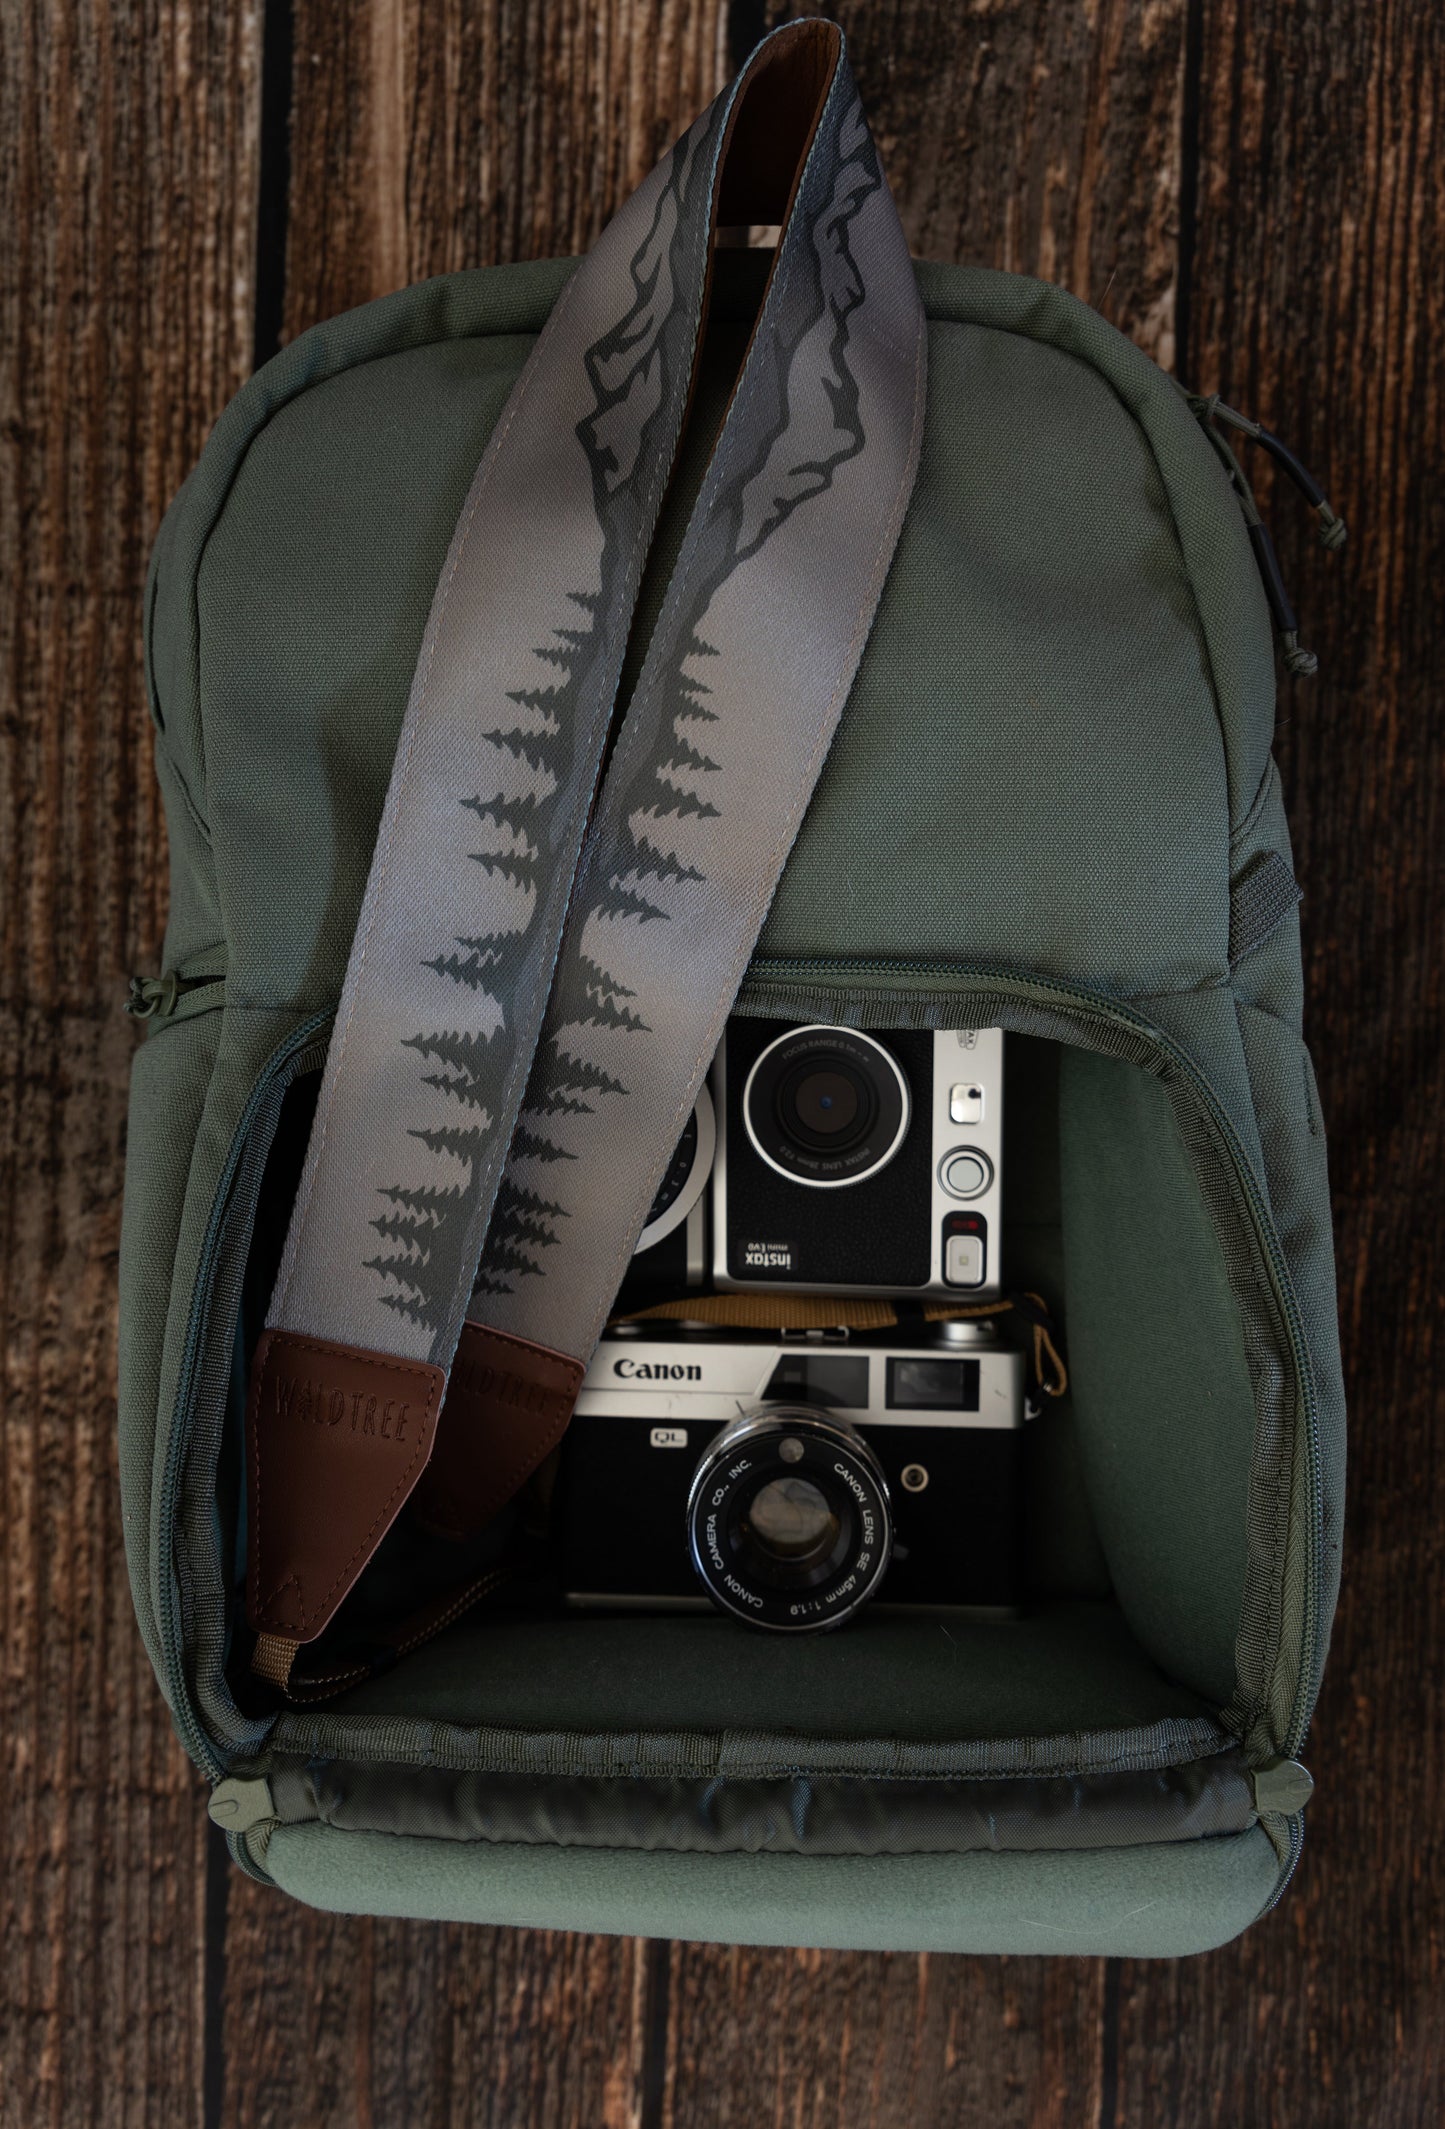 Wildtree camera strap printed with trees and mountains laying on green backpack with camera gear